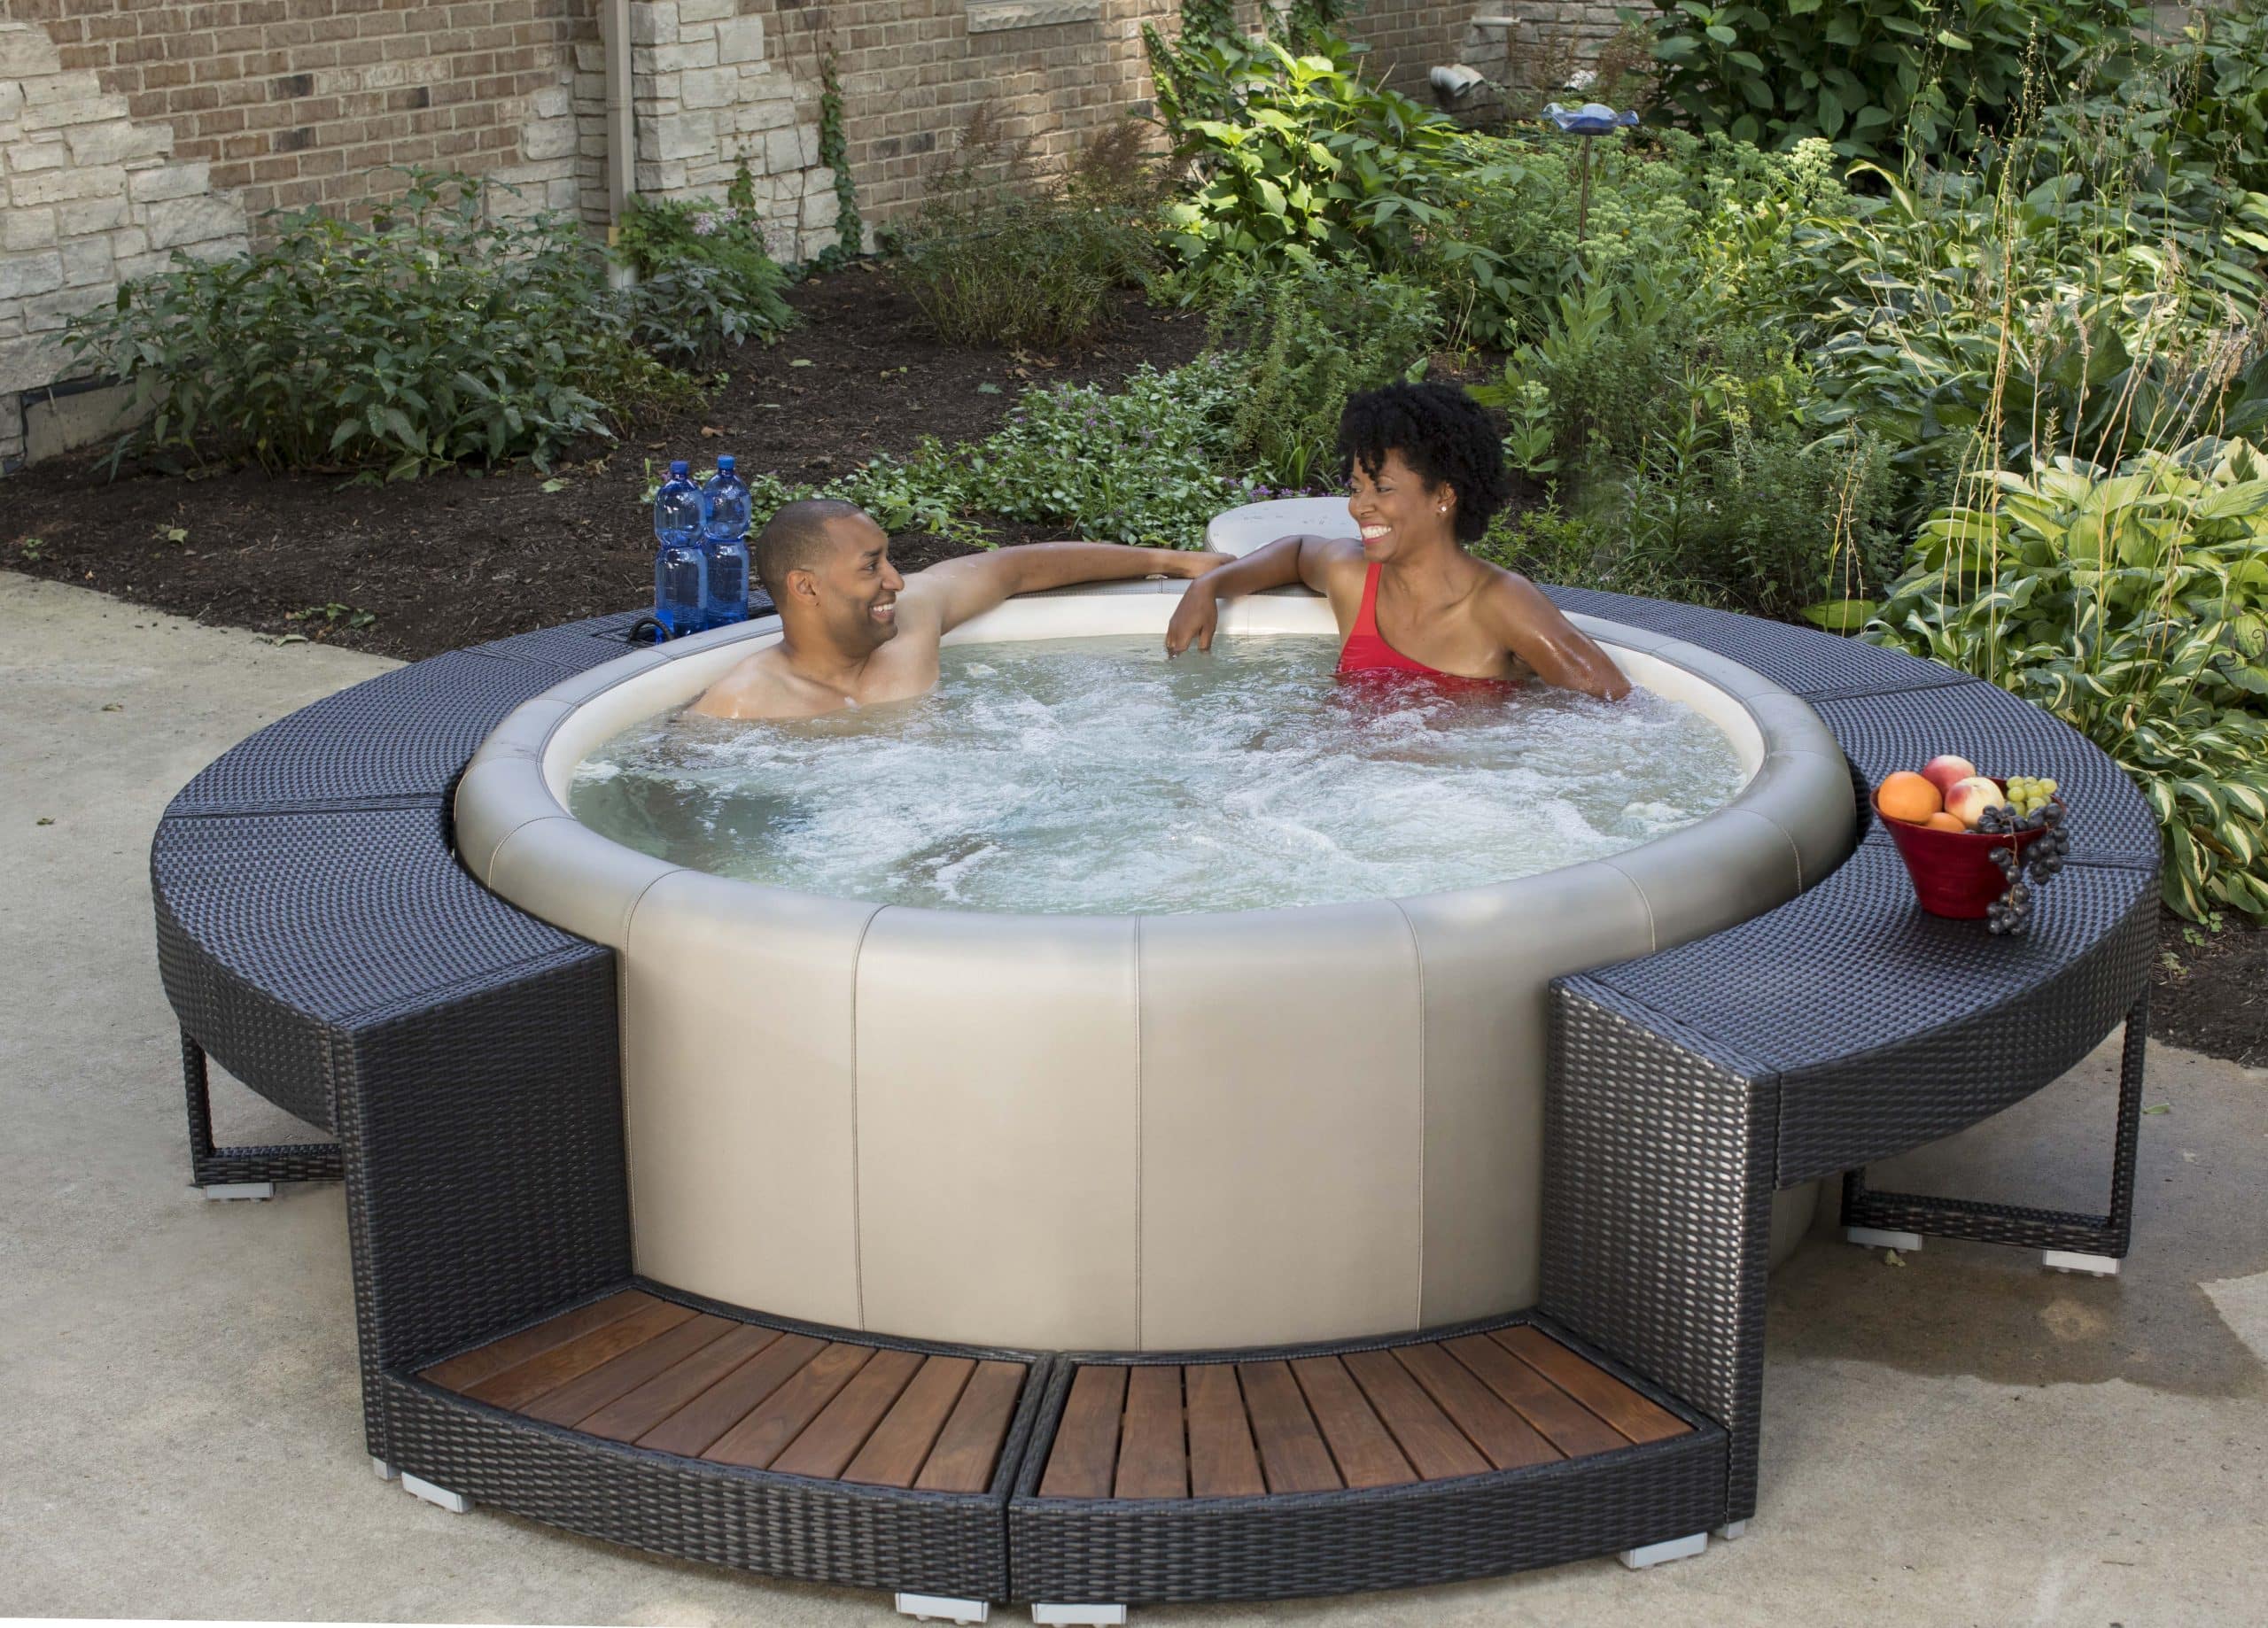 Complete Your Softub With One of Our Exterior Surround Options